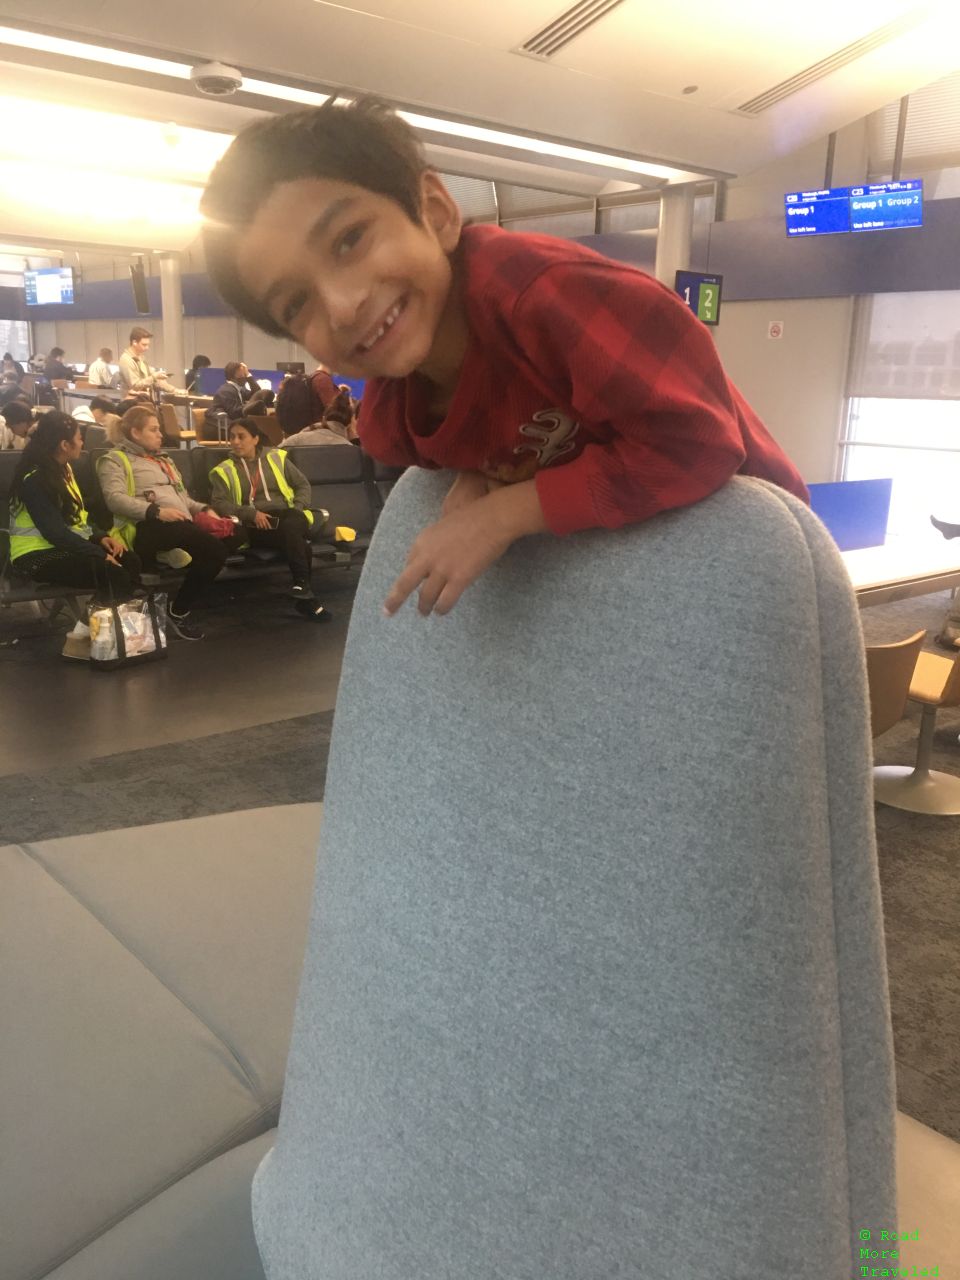 Climbing on sofas in ORD Terminal 1 gate area